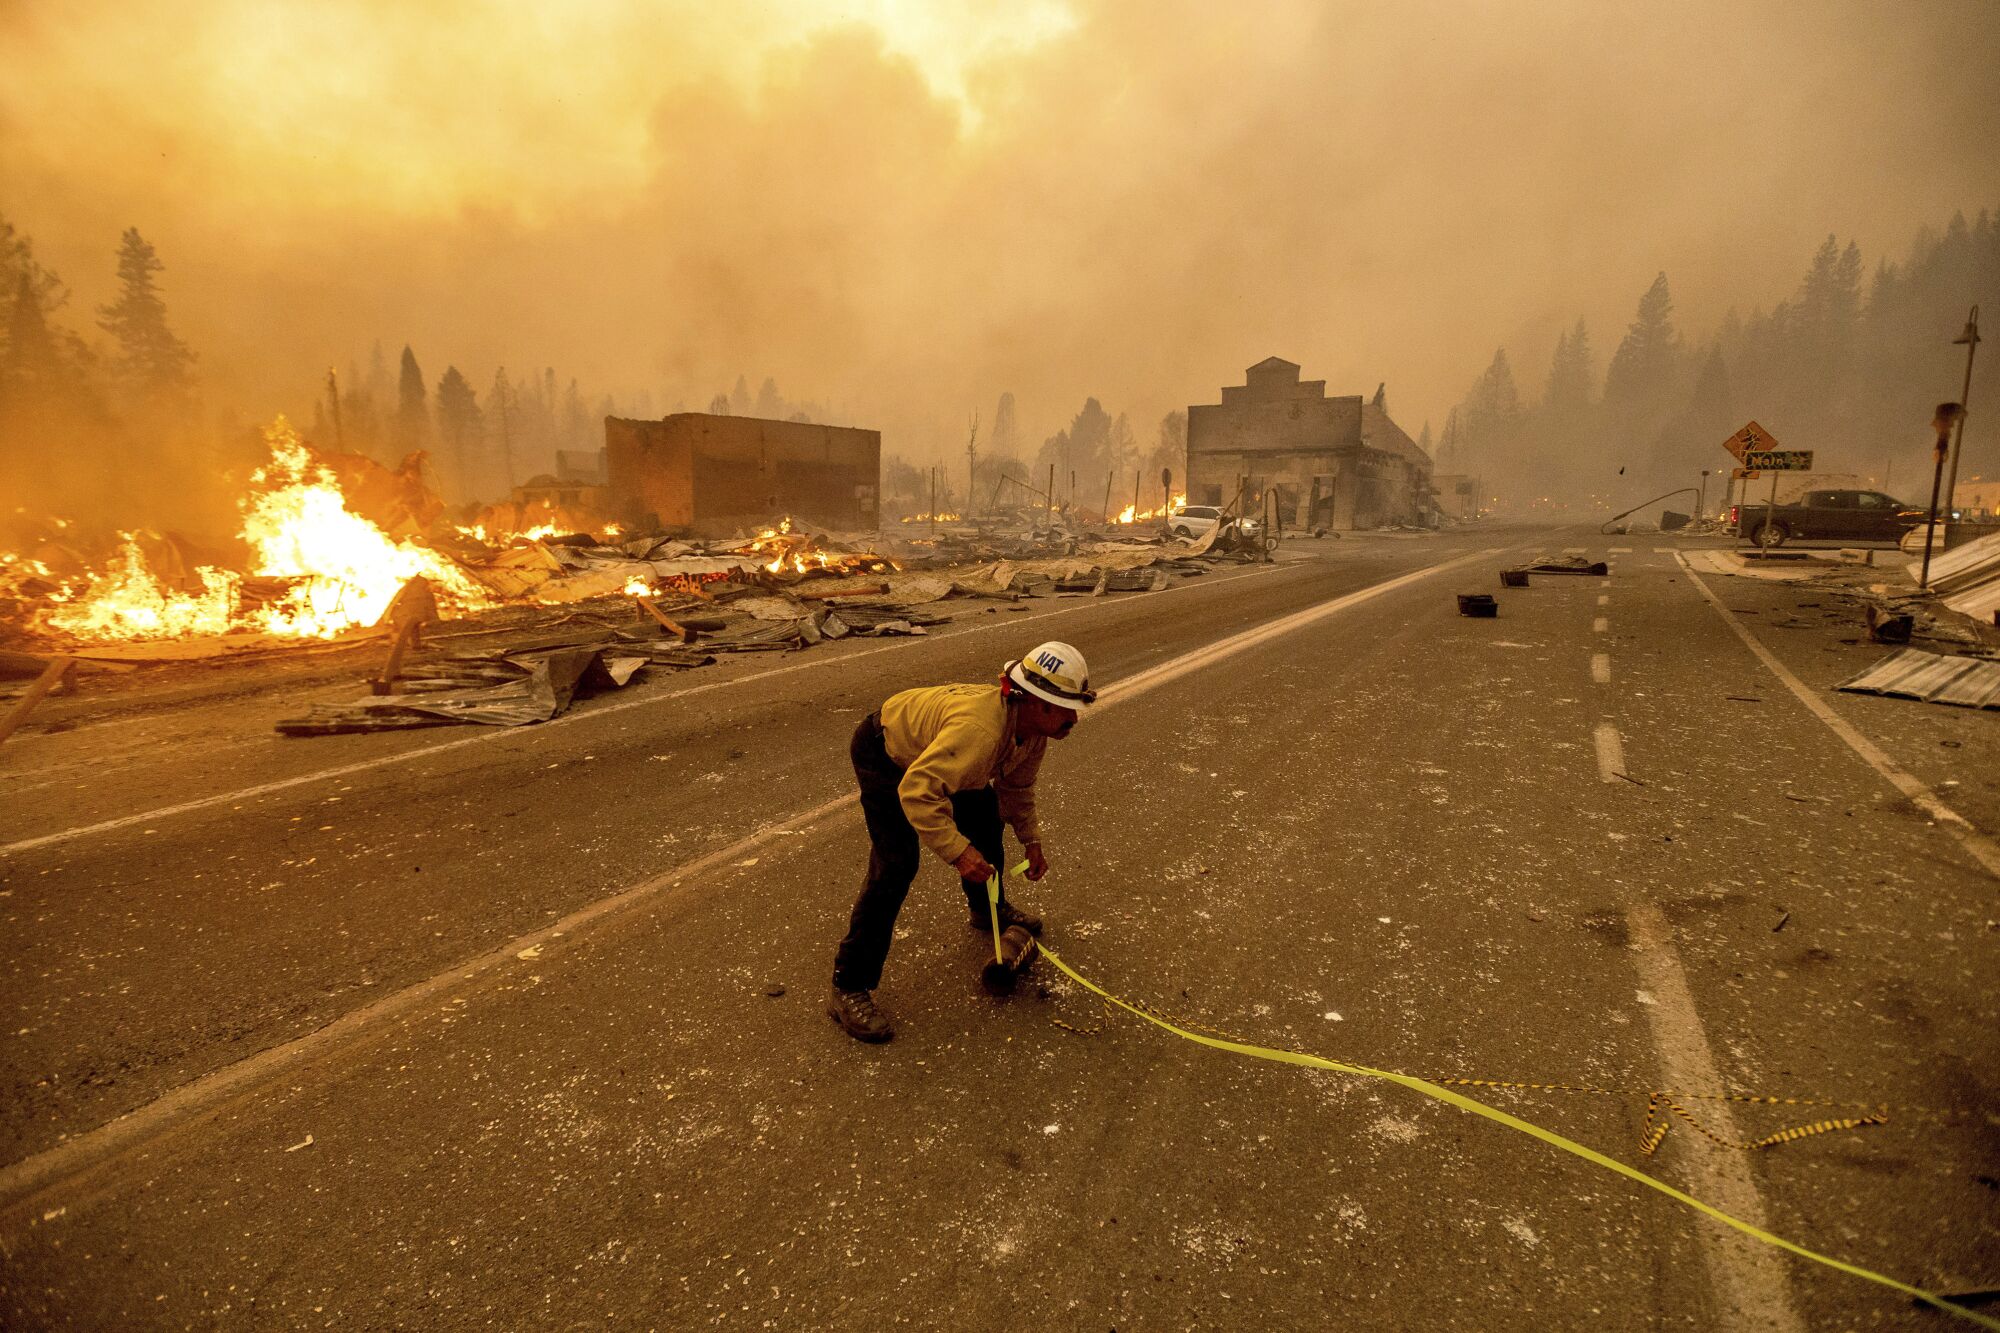 A man bends as he uses tape to mark a roadway. In the background, fire burns and ruined buildings are shrouded in smoke.